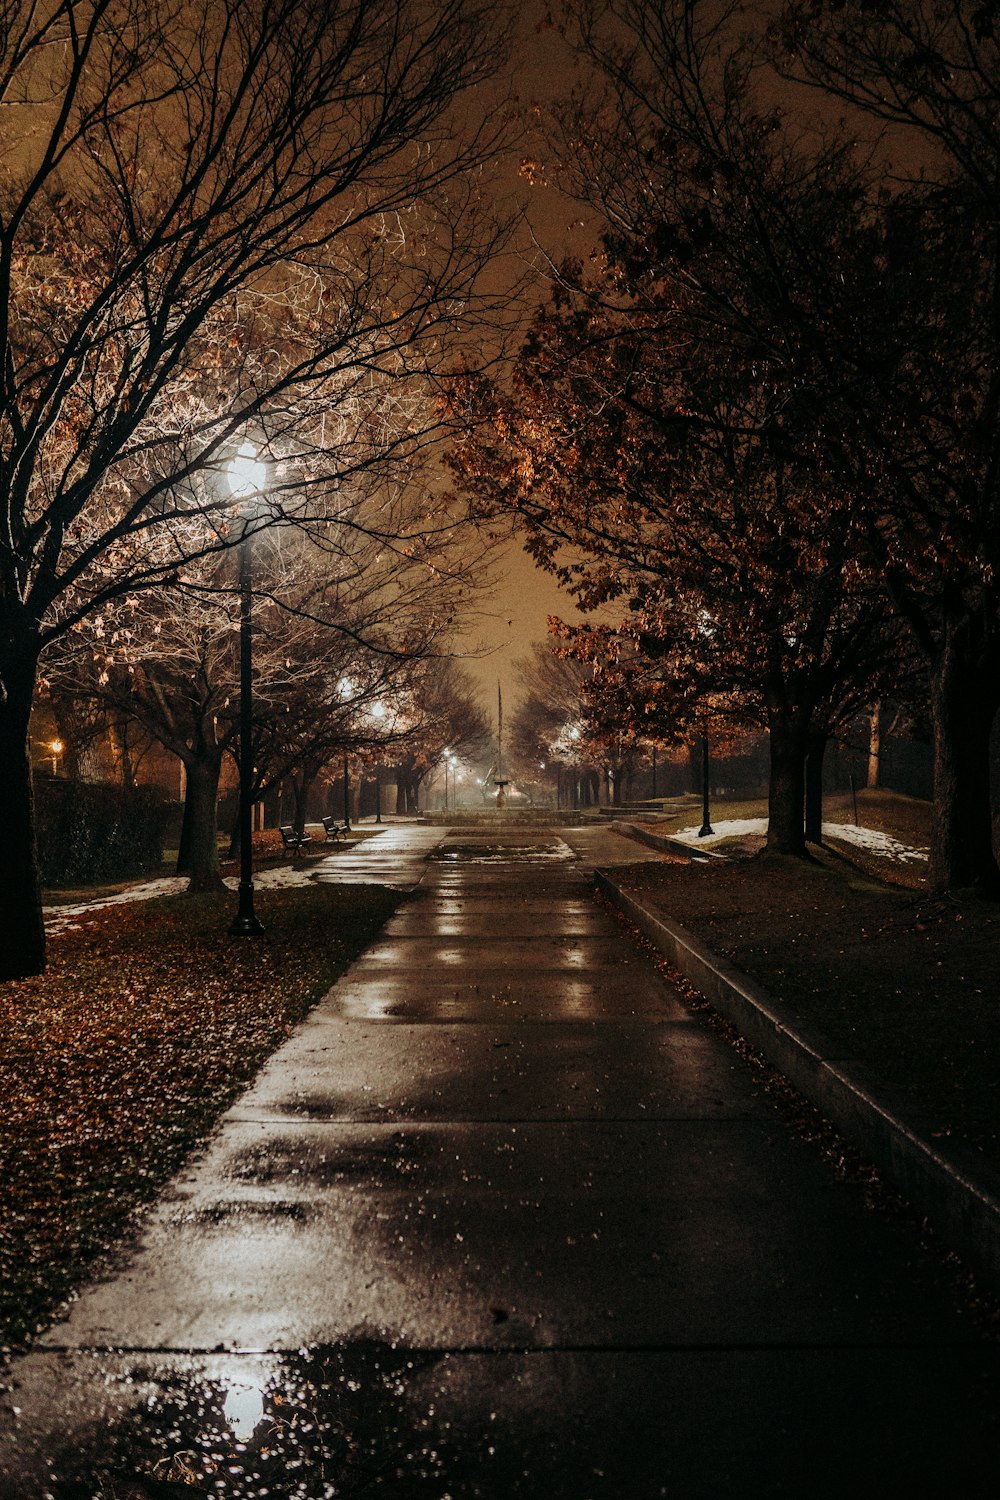 concrete road between trees during nighttime